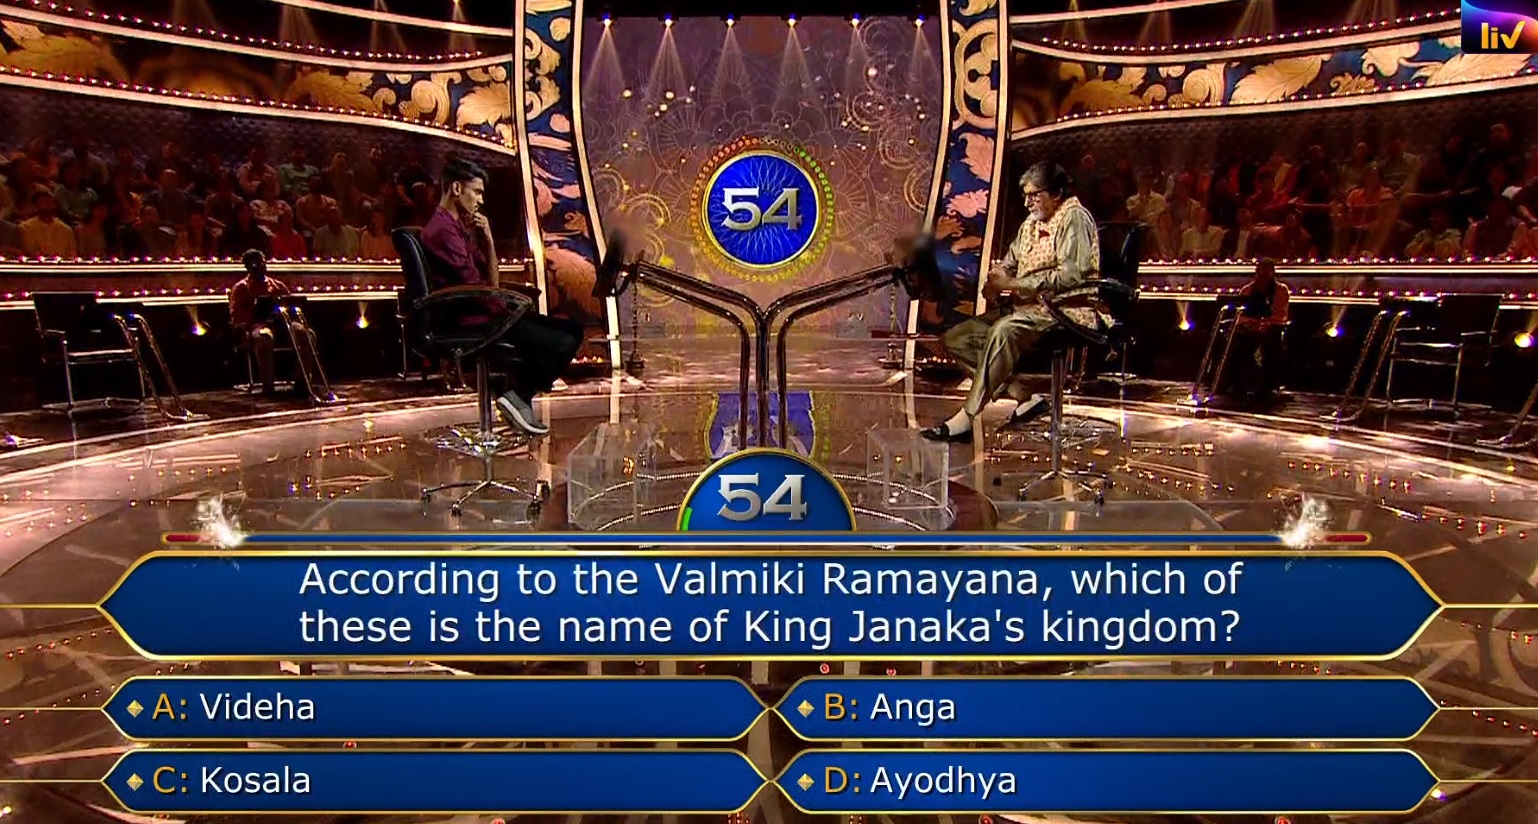 Ques : According to the Valmiki Ramayana, which of these is the name of King Janaka’s kingdom?